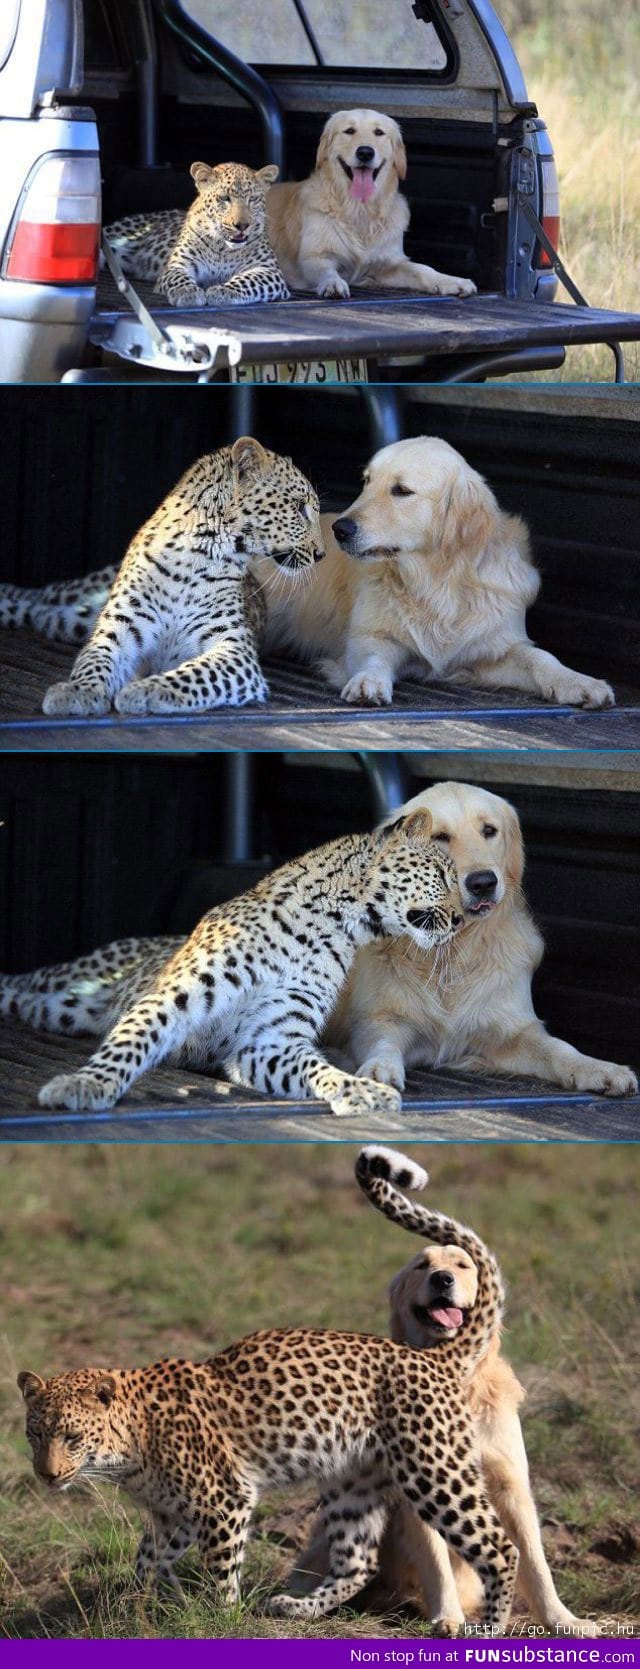 Cheetah and Dog Best Friends